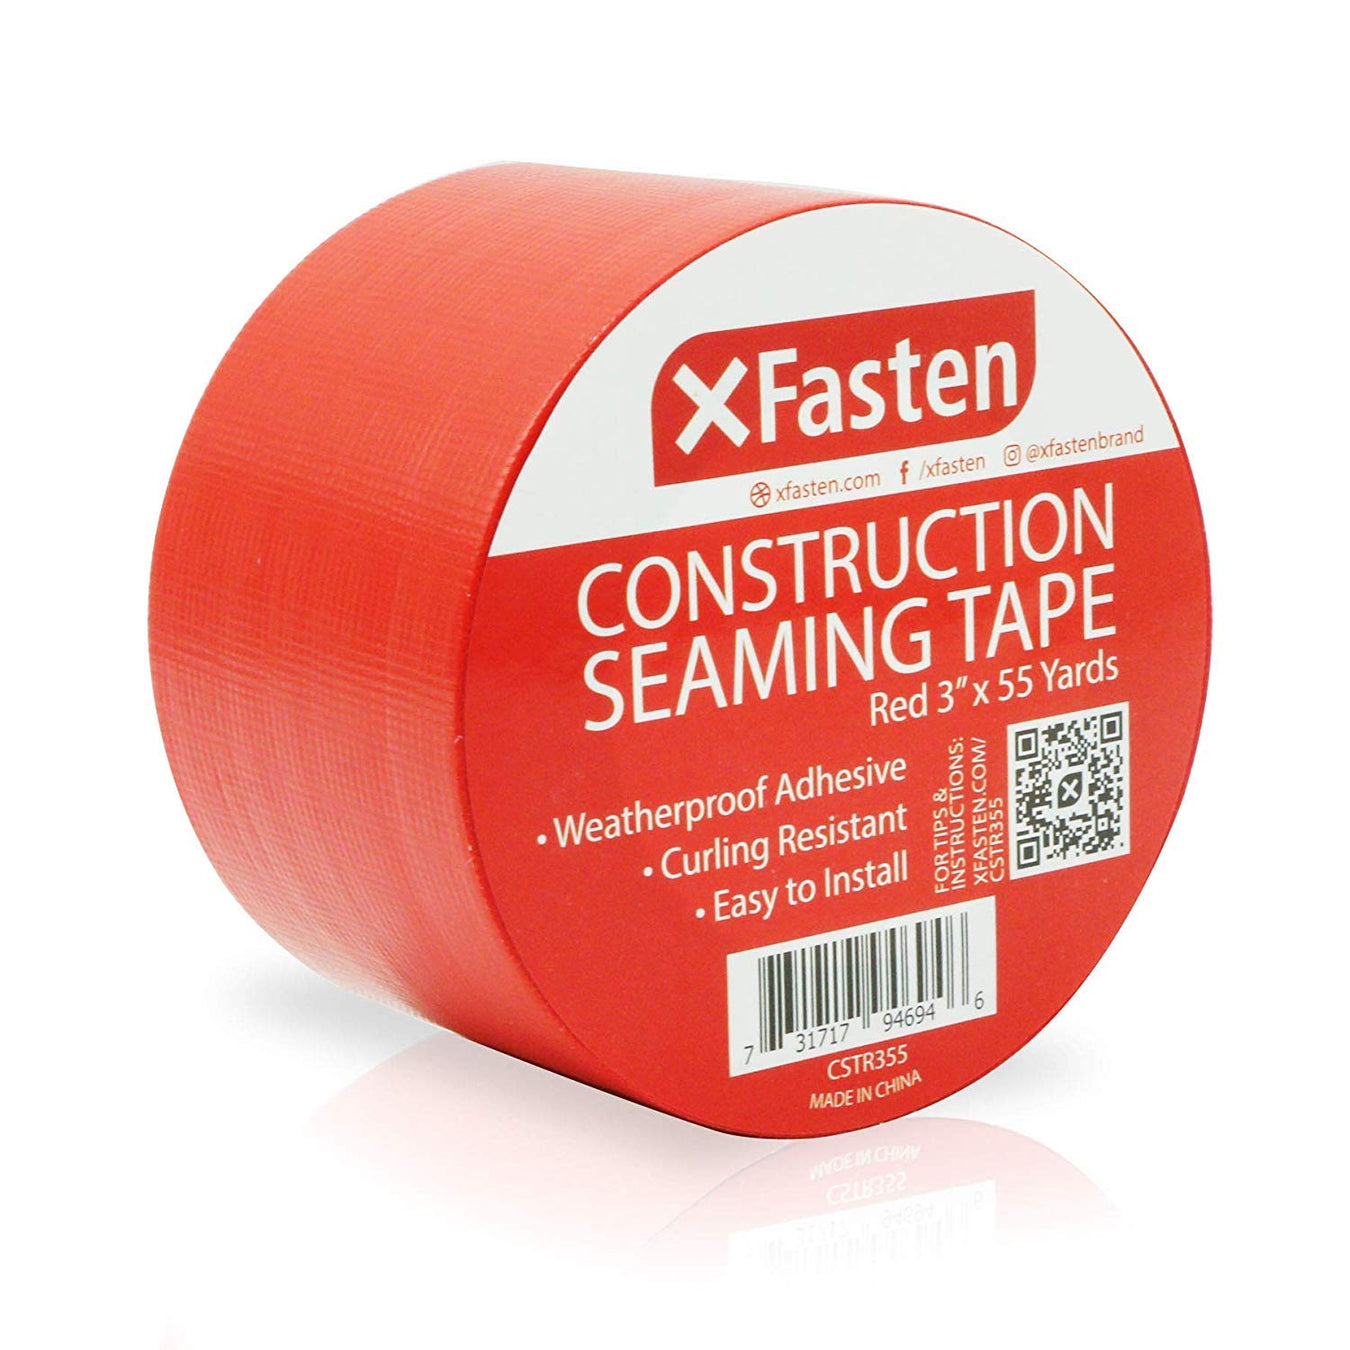 Construction Seaming Tape